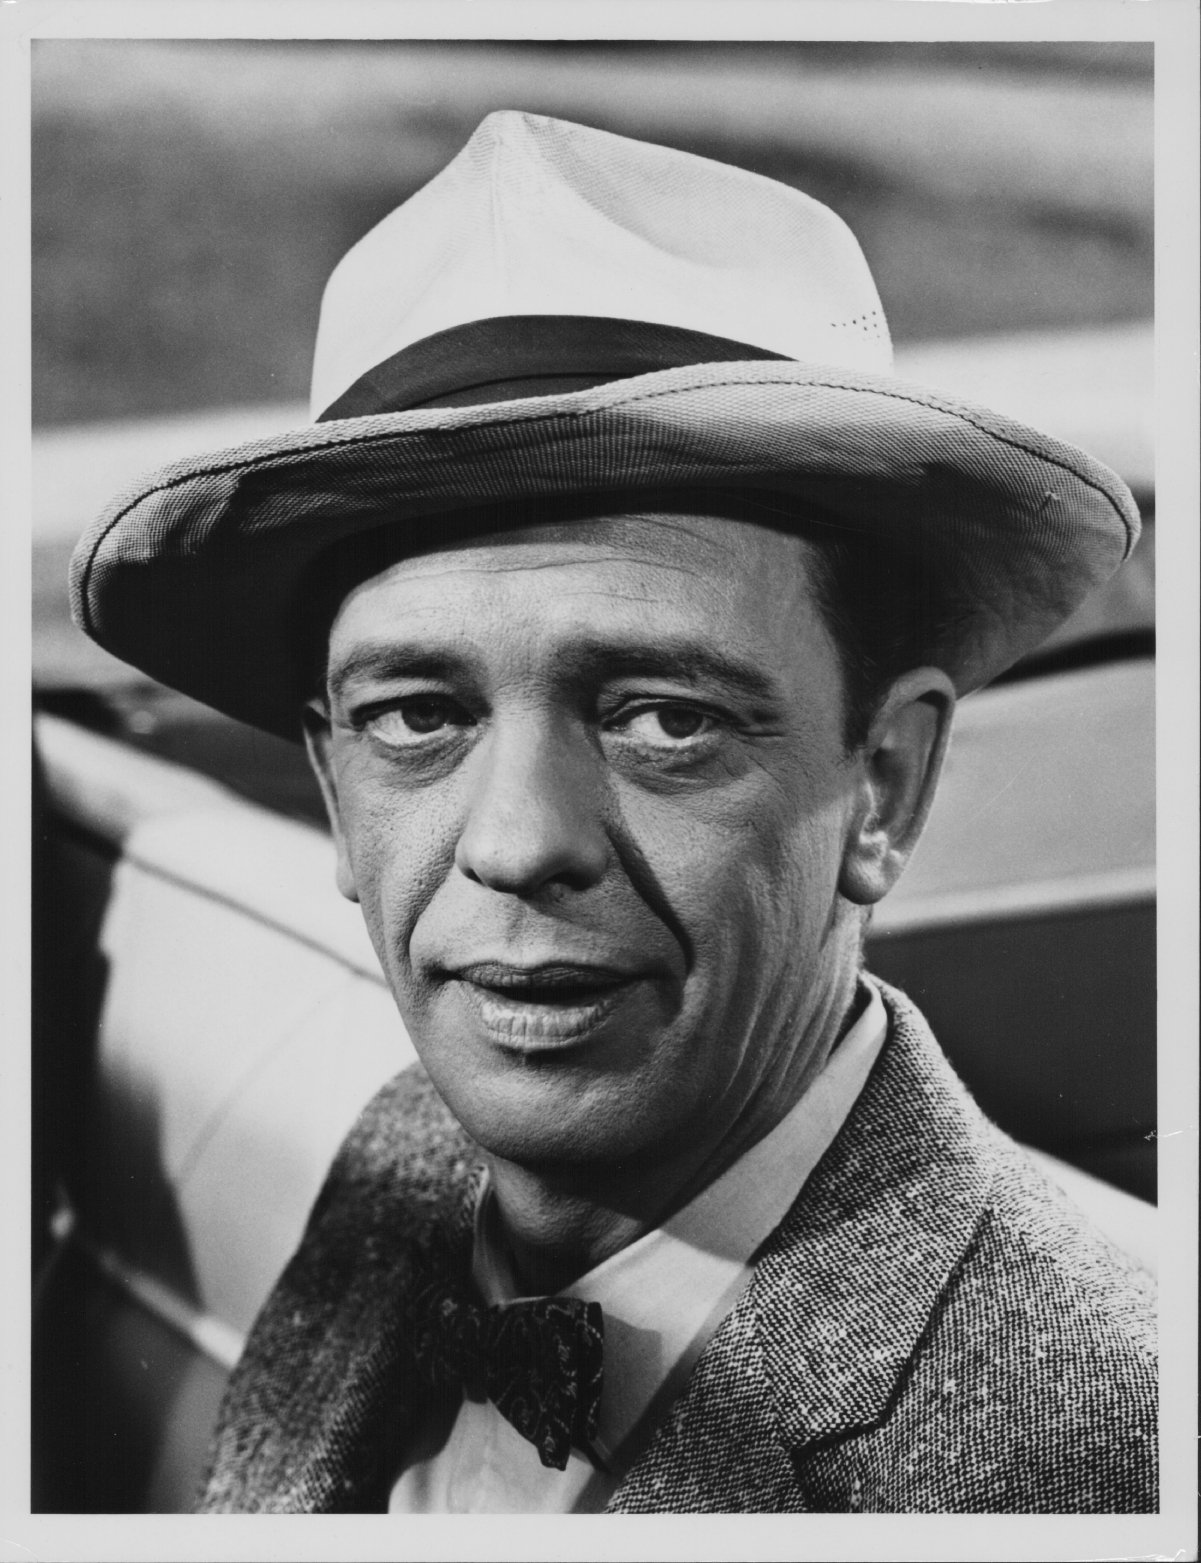 Don Knotts in 1960